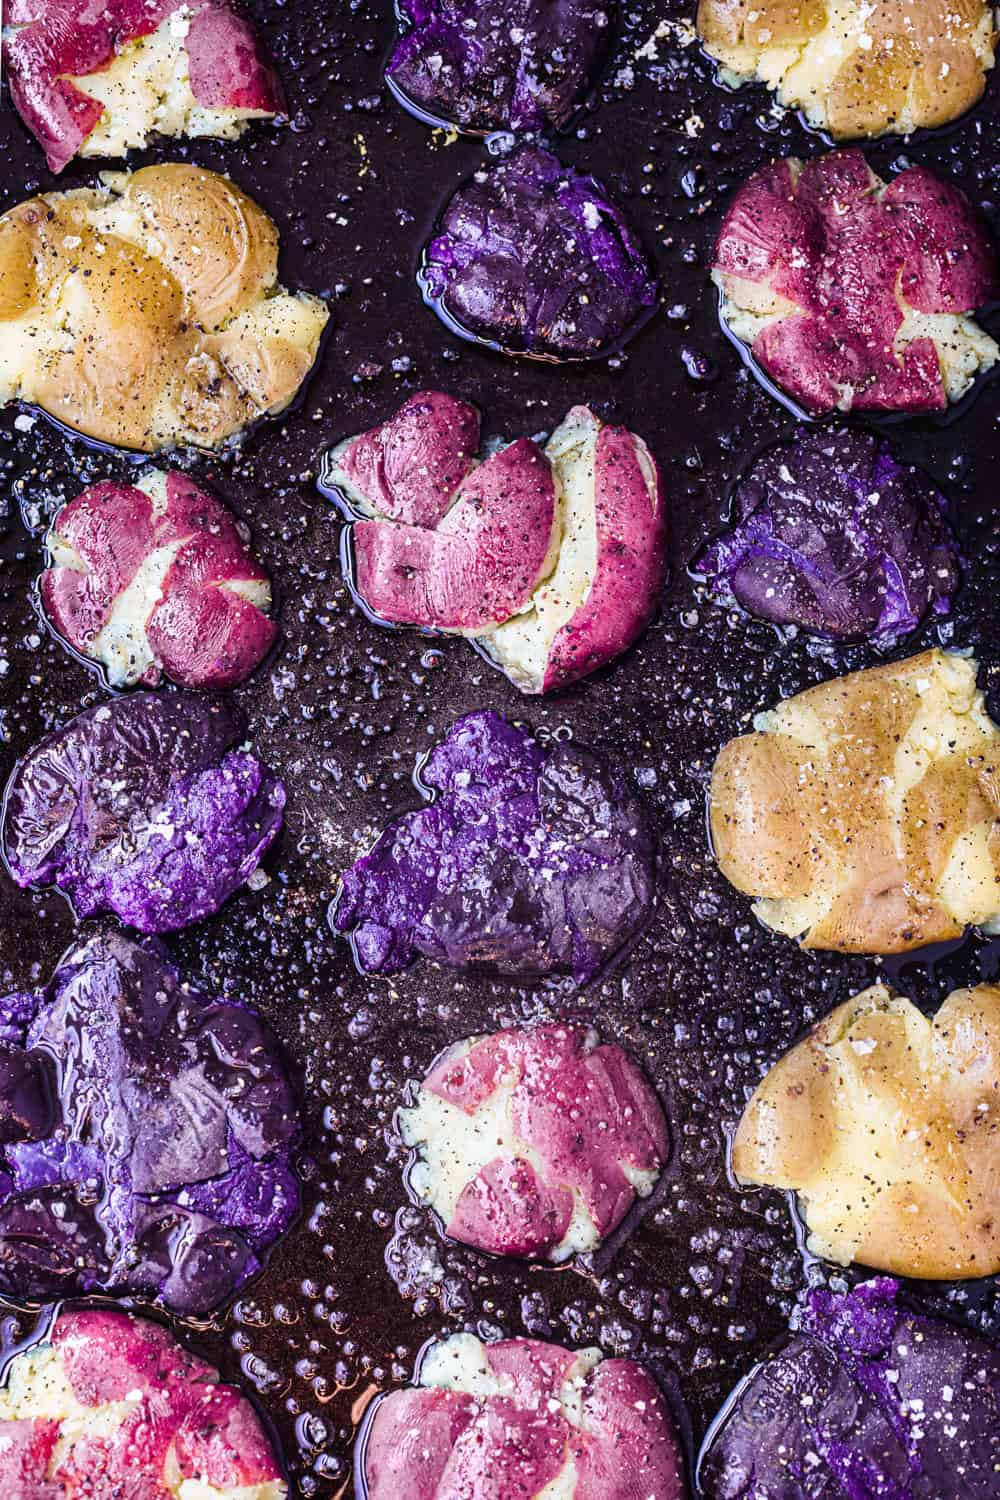 Smashed purple, pink and white potatoes drizzled with olive oil and flaky sea salt on black baking sheet; overhead shot.